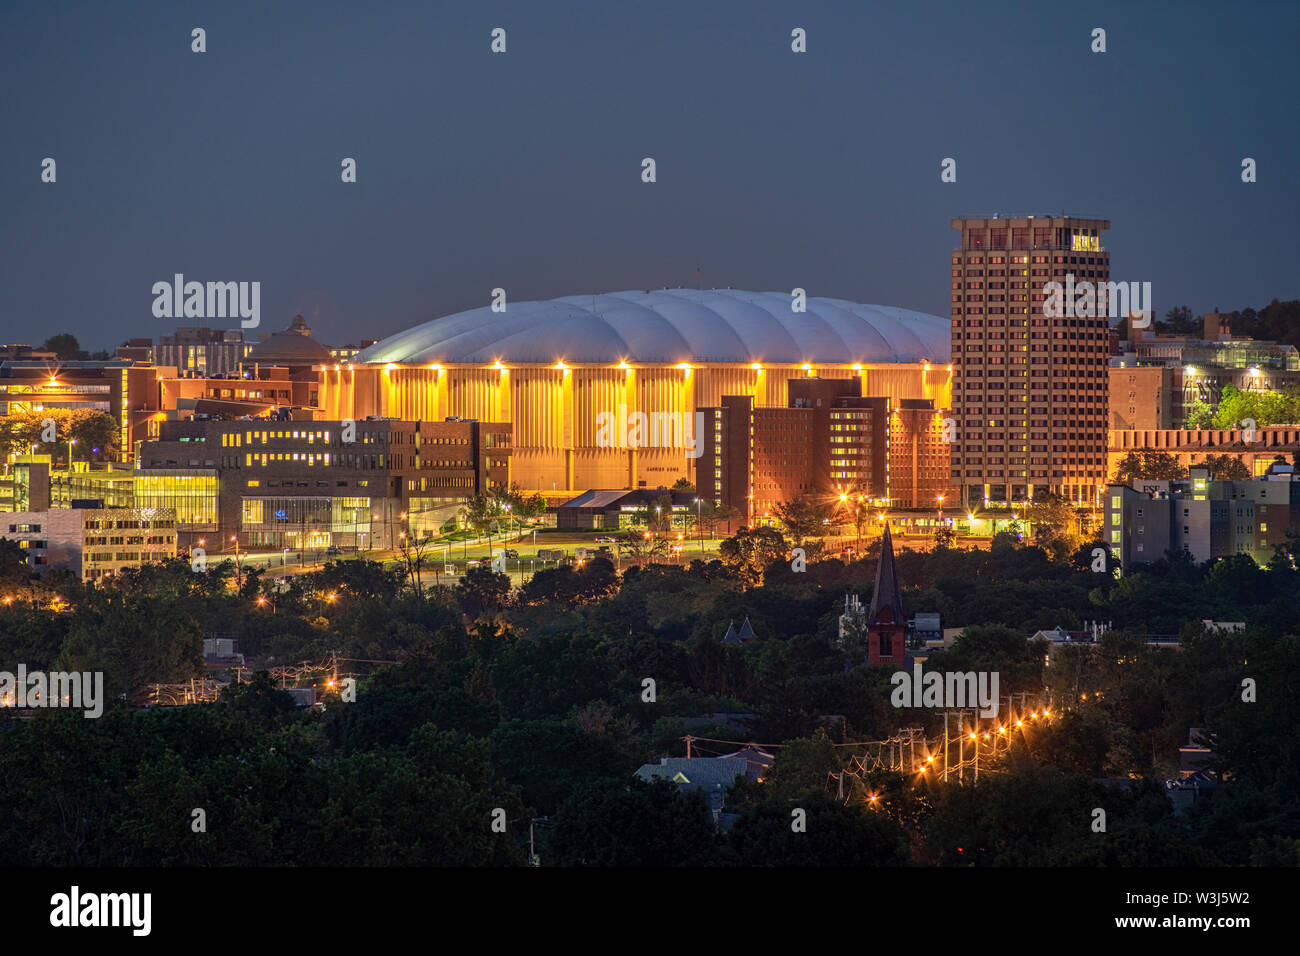 SYRACUSE, NEW YORK - JULY 13, 2019: Carrier Dome on the Syracuse University Campus. Stock Photo